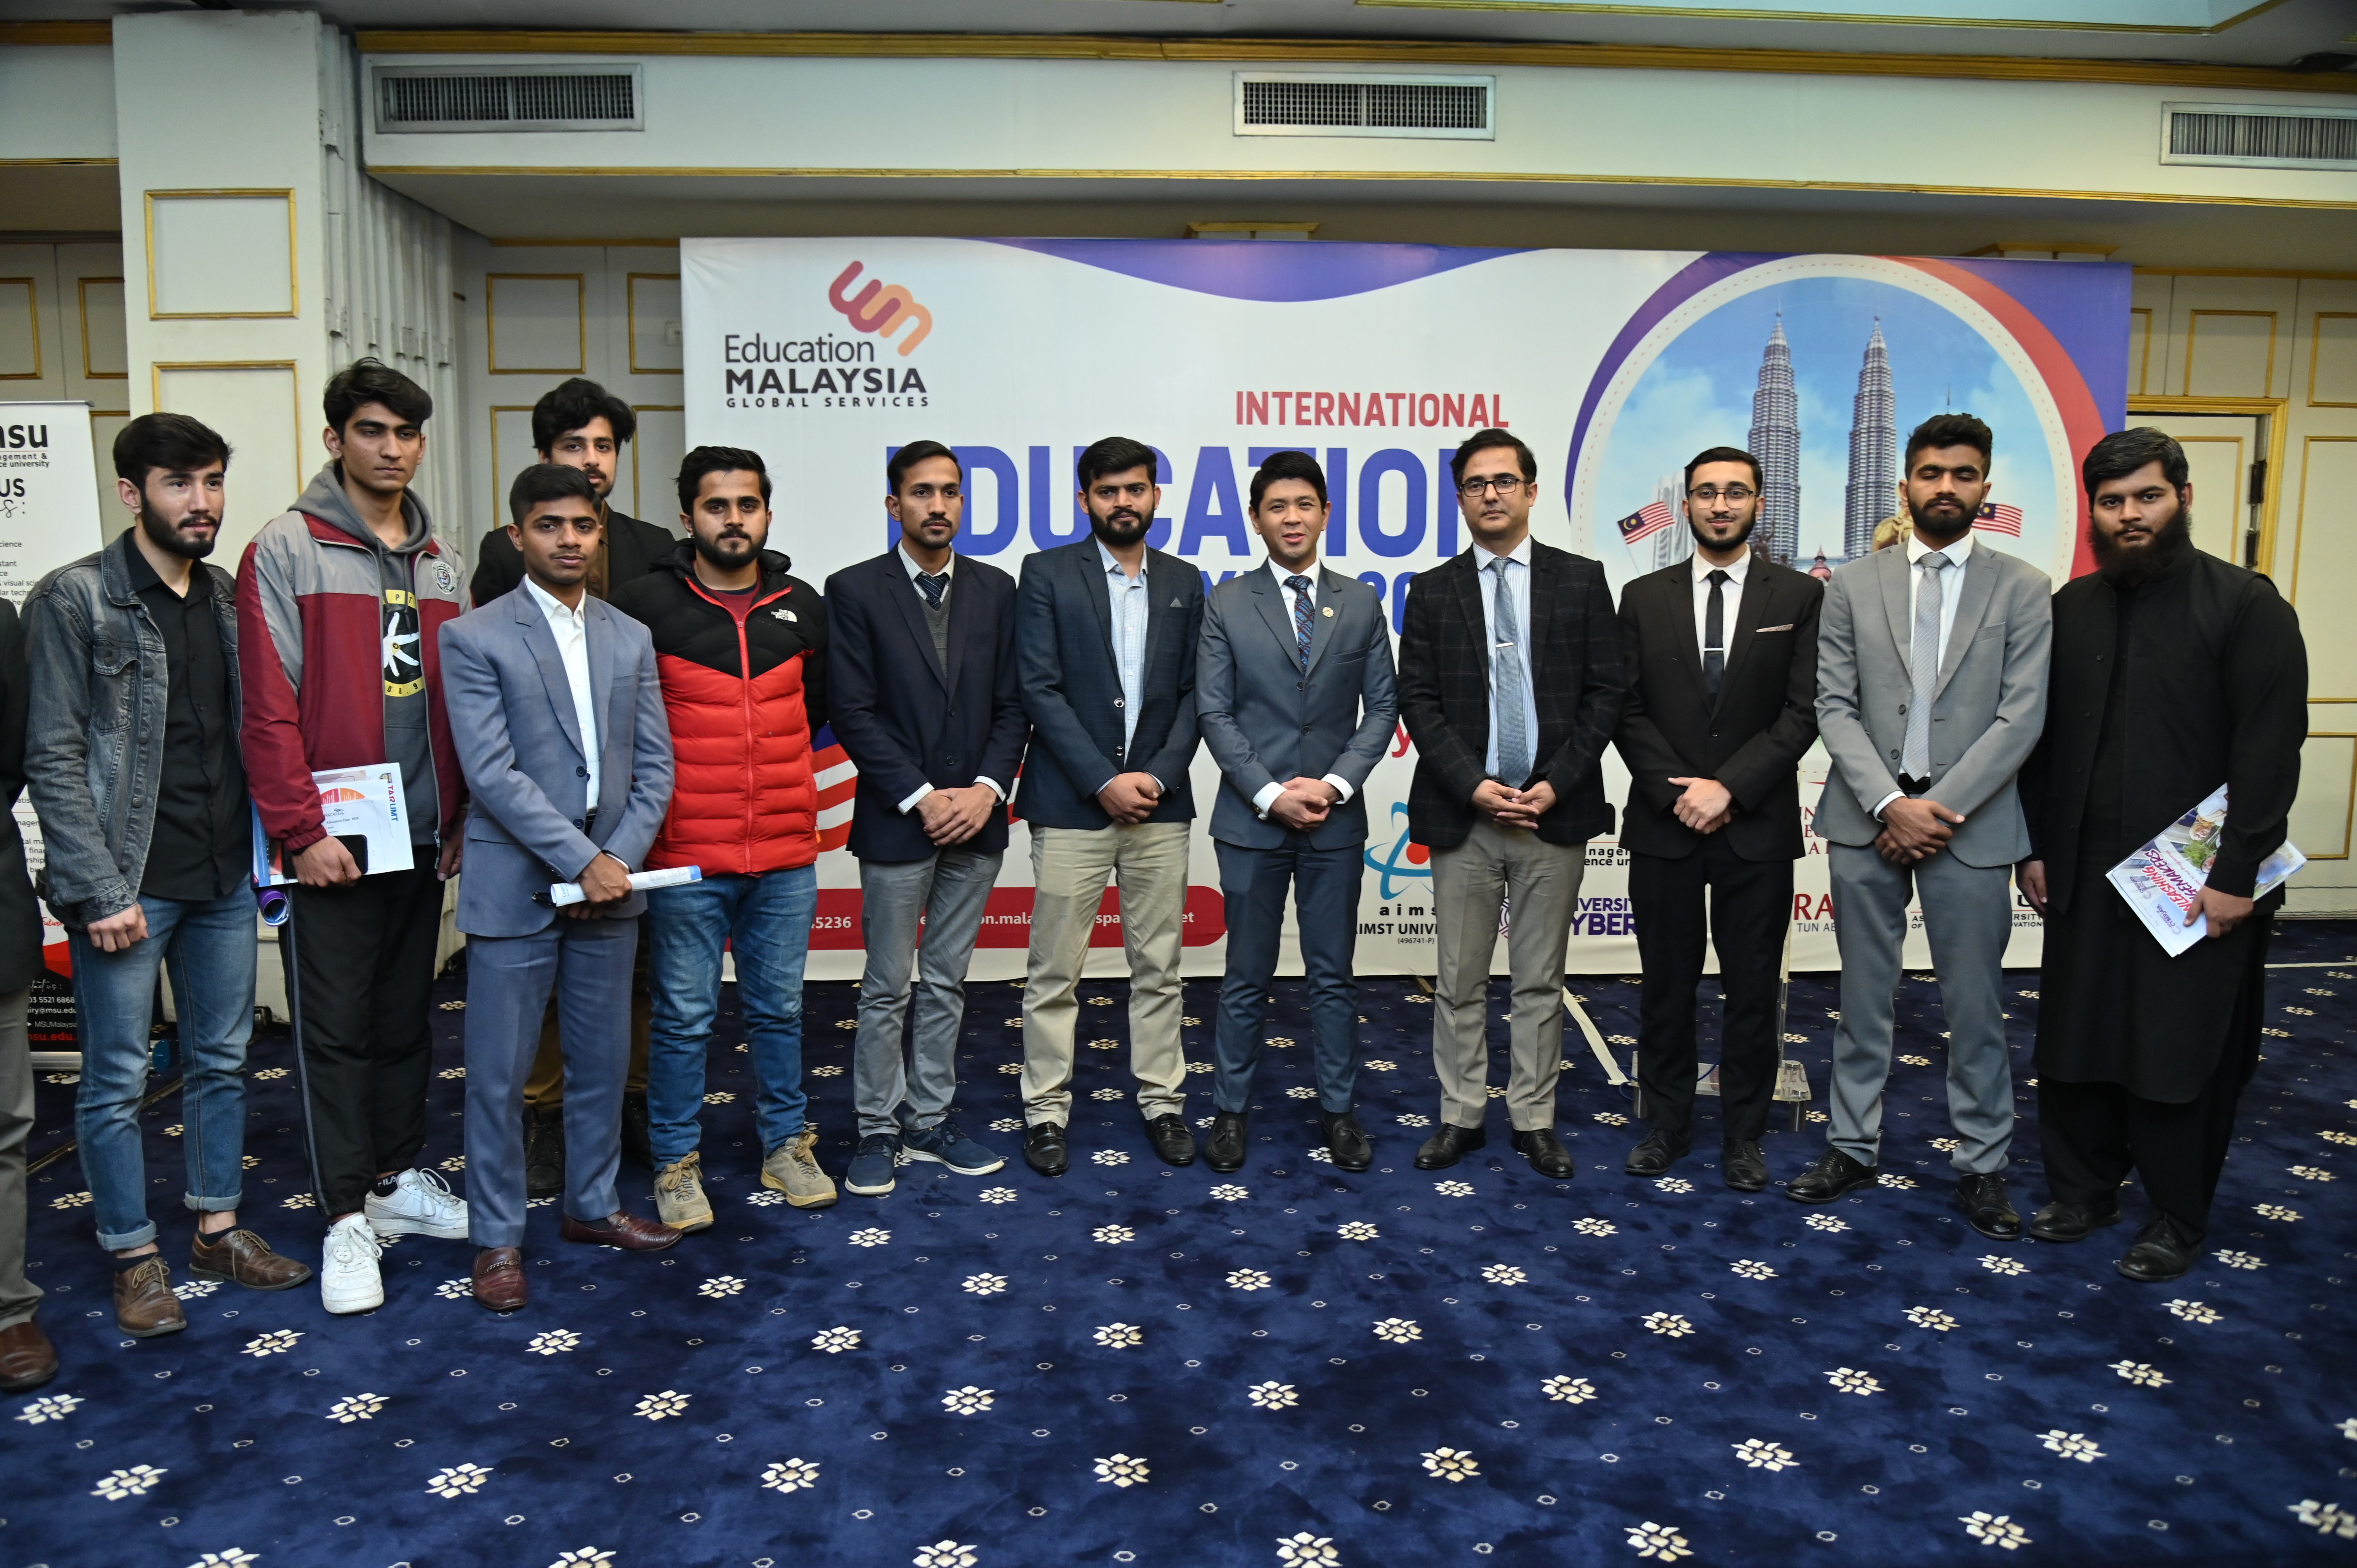 The group photo of students with the Event organizer at the International Education Expo 2024